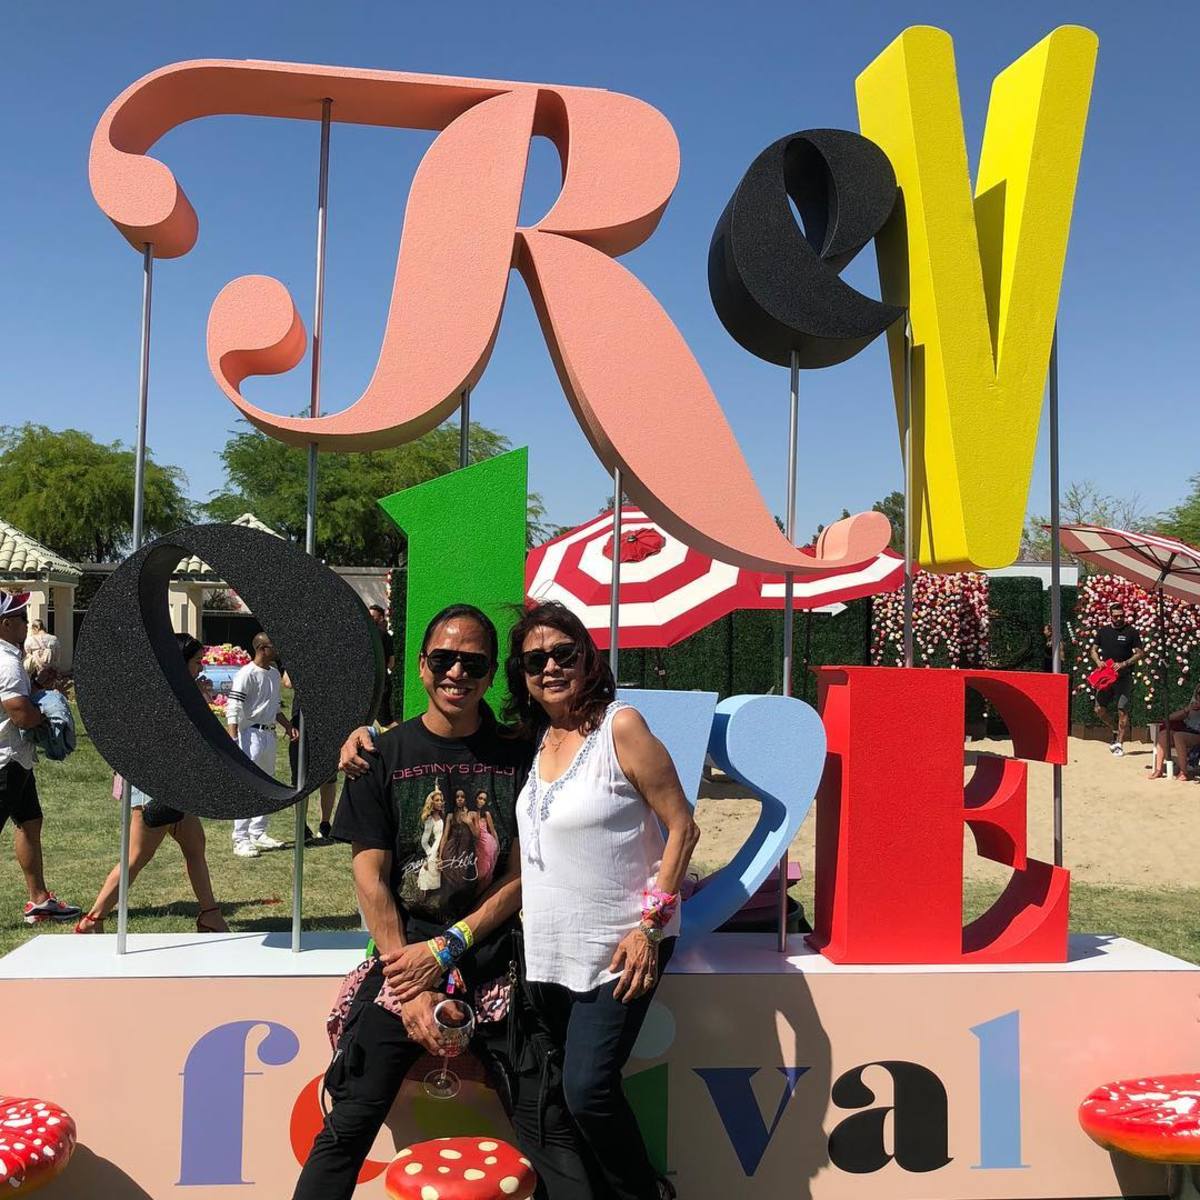 Michael Mente with his mother at Revolve Festival. Photo: @mmente/Instagram